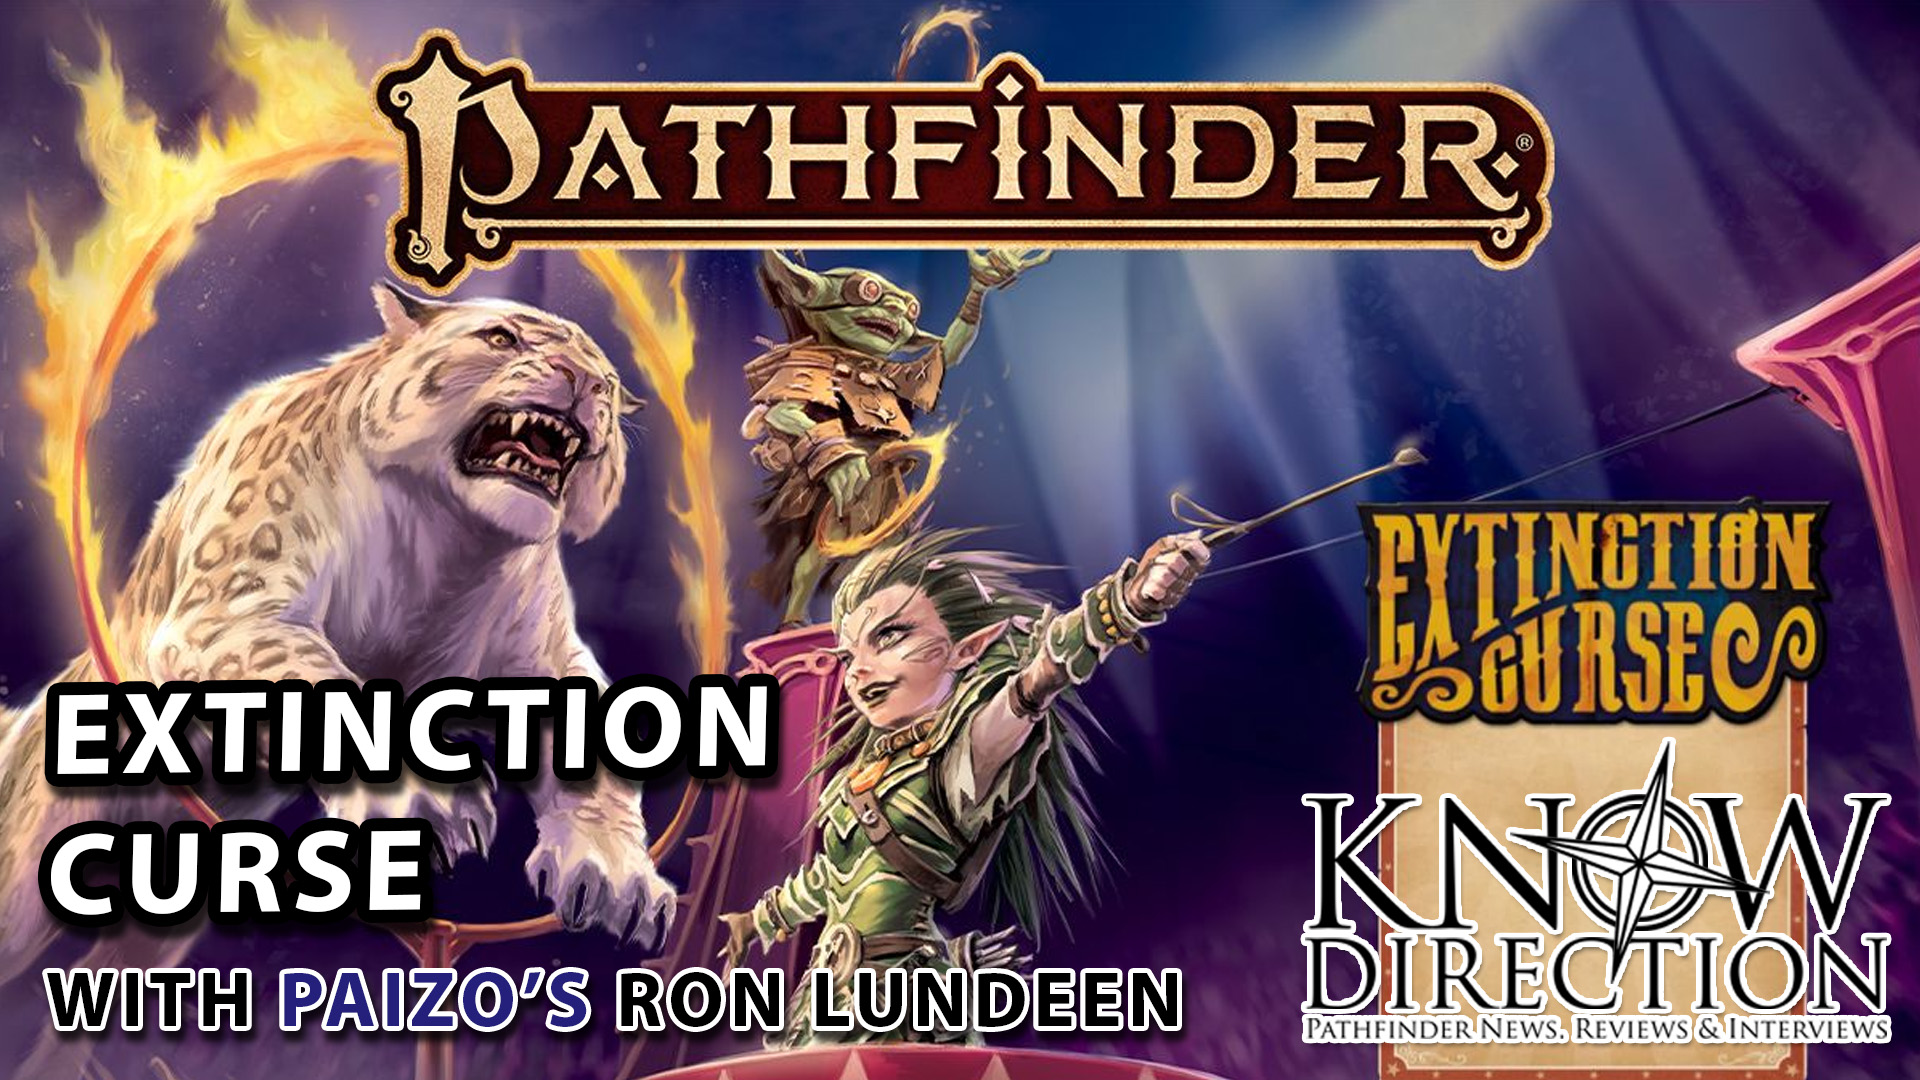 Extinction Curse with Paizo's Ron Lundeen